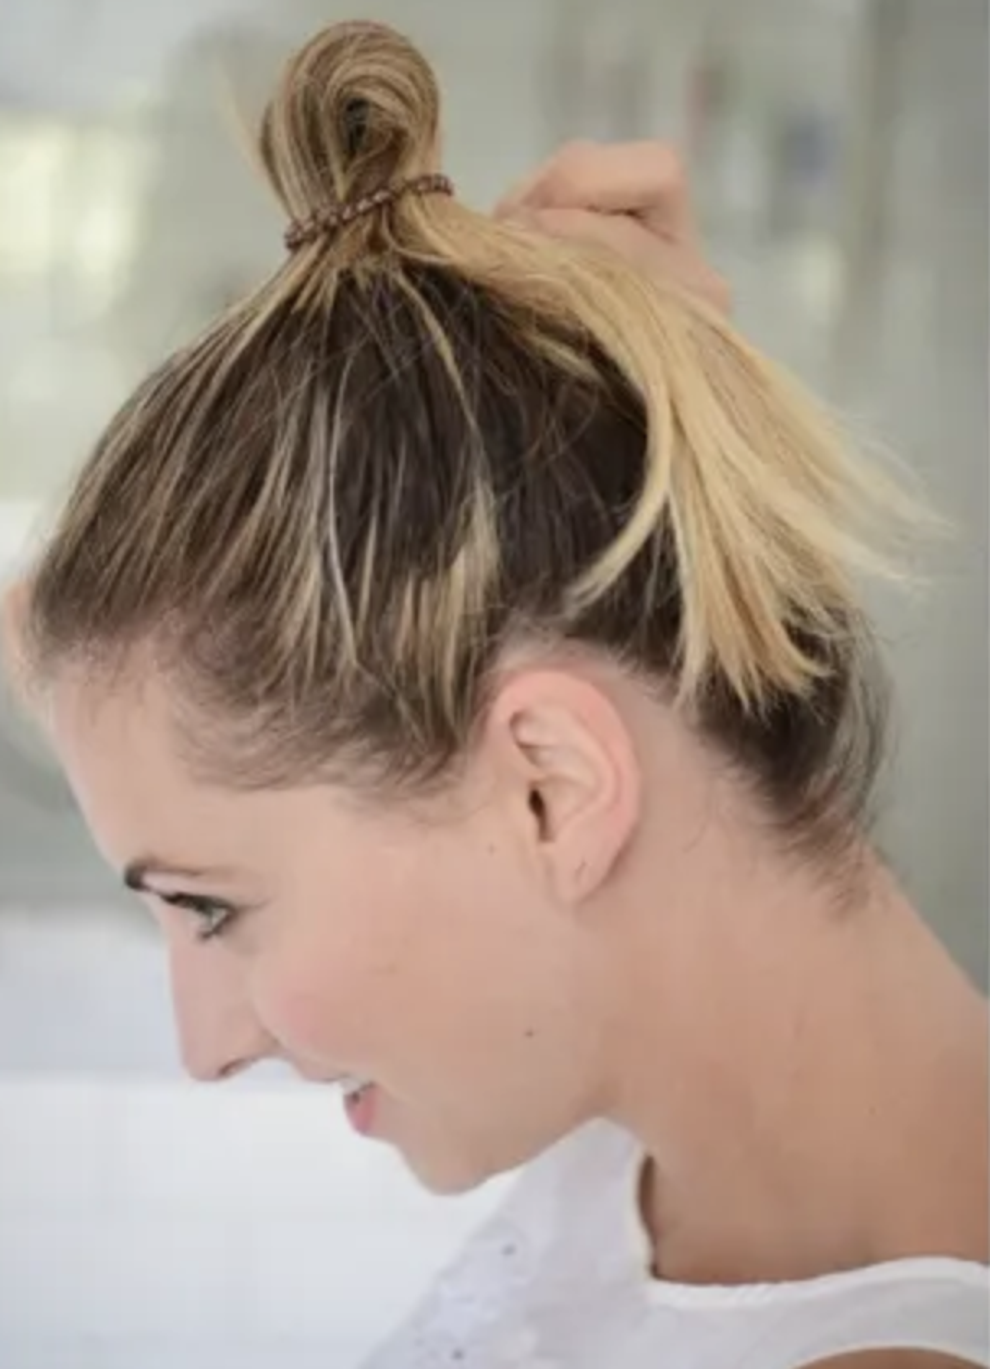 Easy Second Day Hairstyles And Tutorials